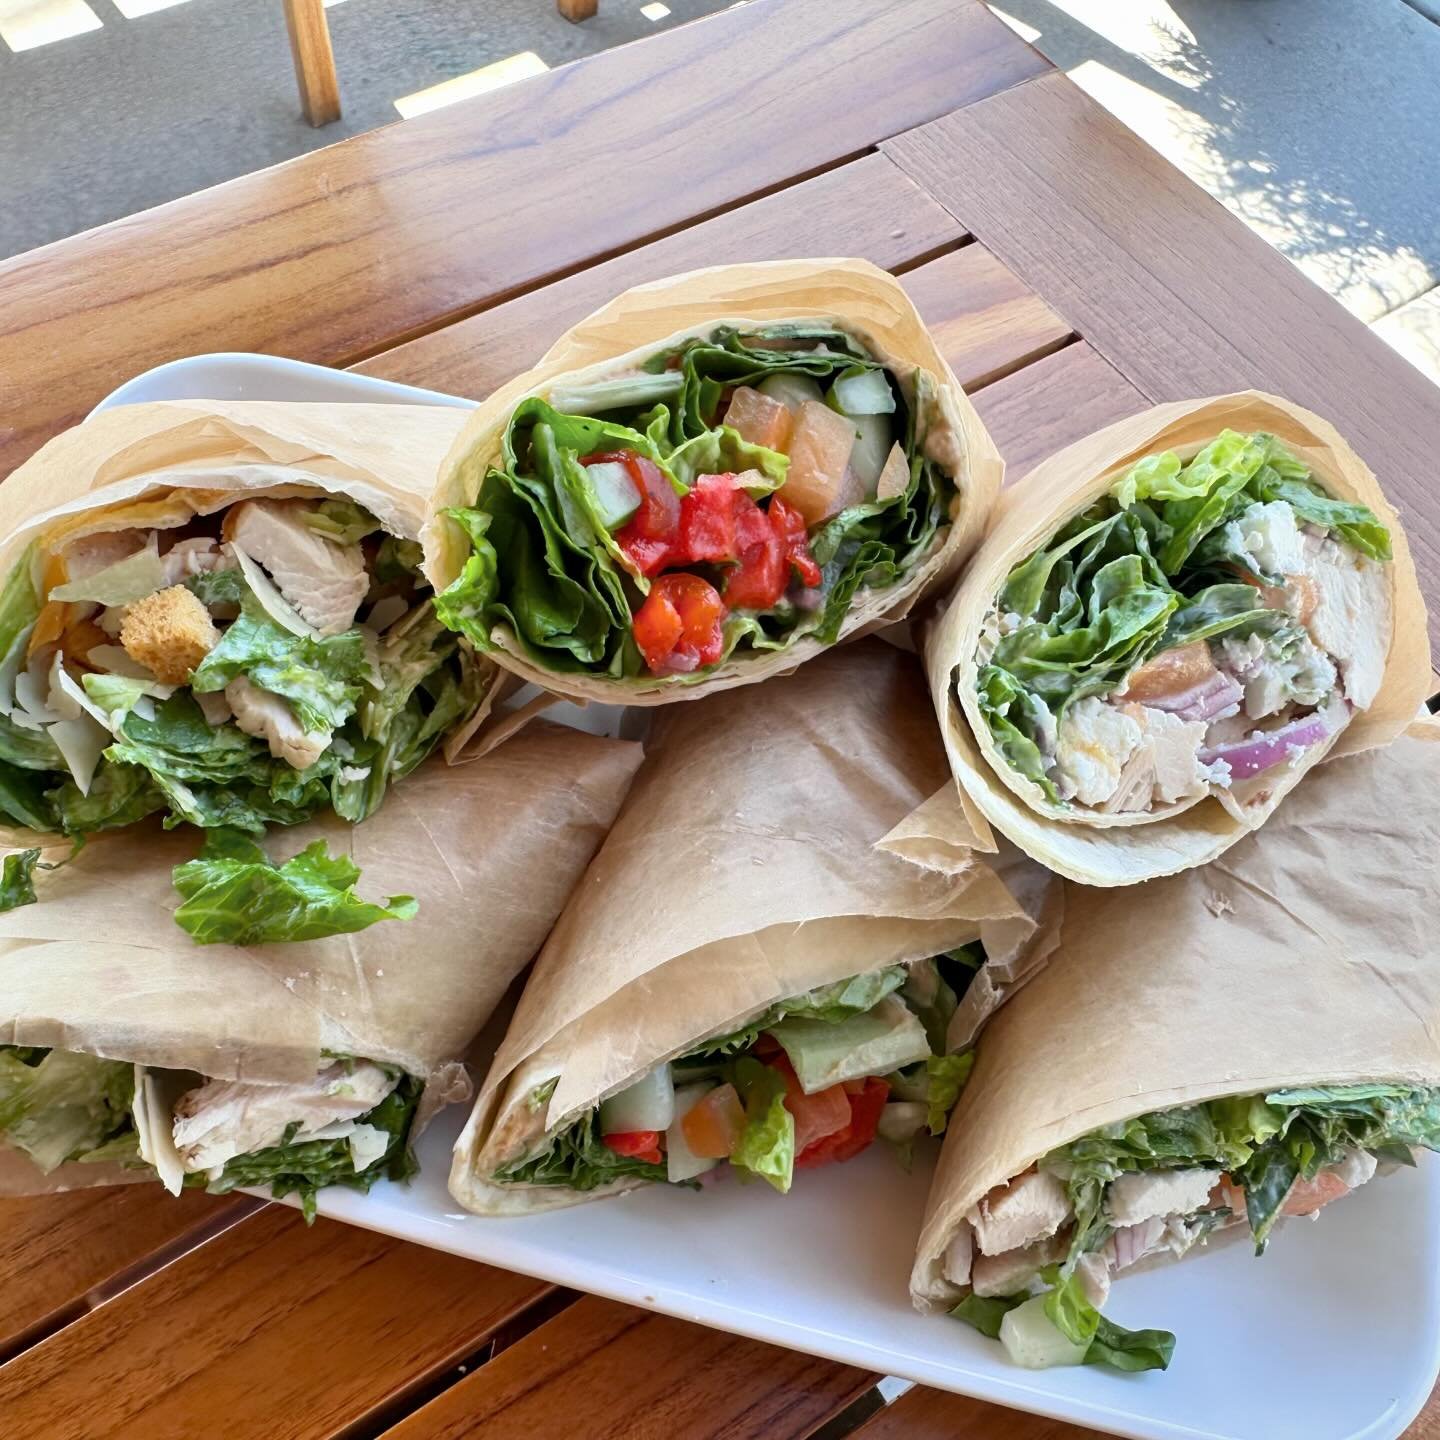 A nice refreshing wrap is just the thing for a warm Spring day. 
The lineup:
Chicken Caesar 
Veggie
Greek Chicken
🌯